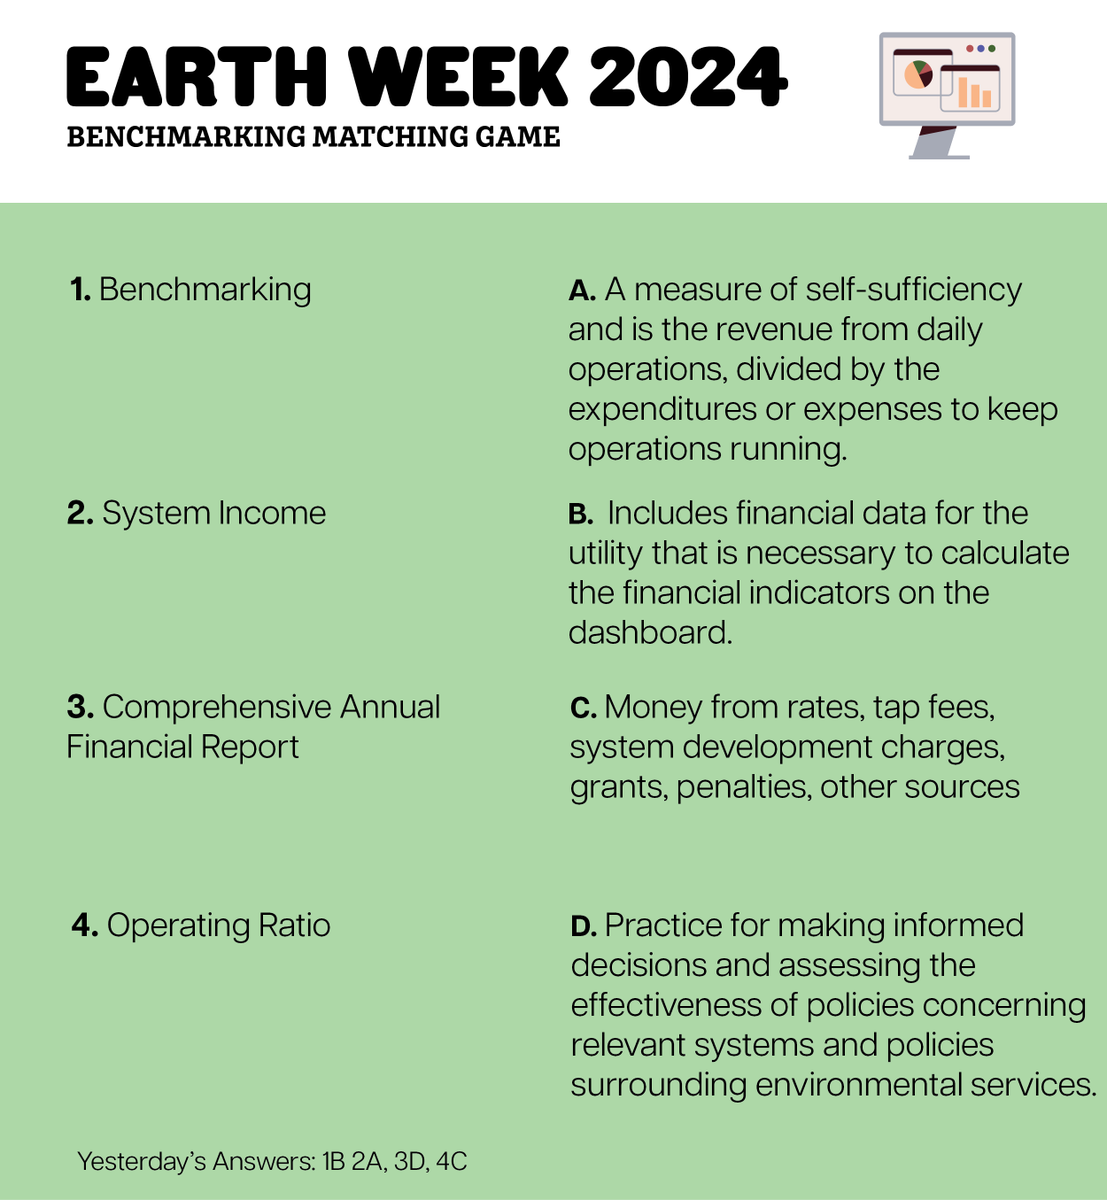 It's Sunday! 🎉 To close out Earth Week, we have one last matching game on benchmarking. The answers to yesterday's game are printed at the bottom and answers to today's game will be revealed tomorrow! #Benchmark #EarthWeek #EFC